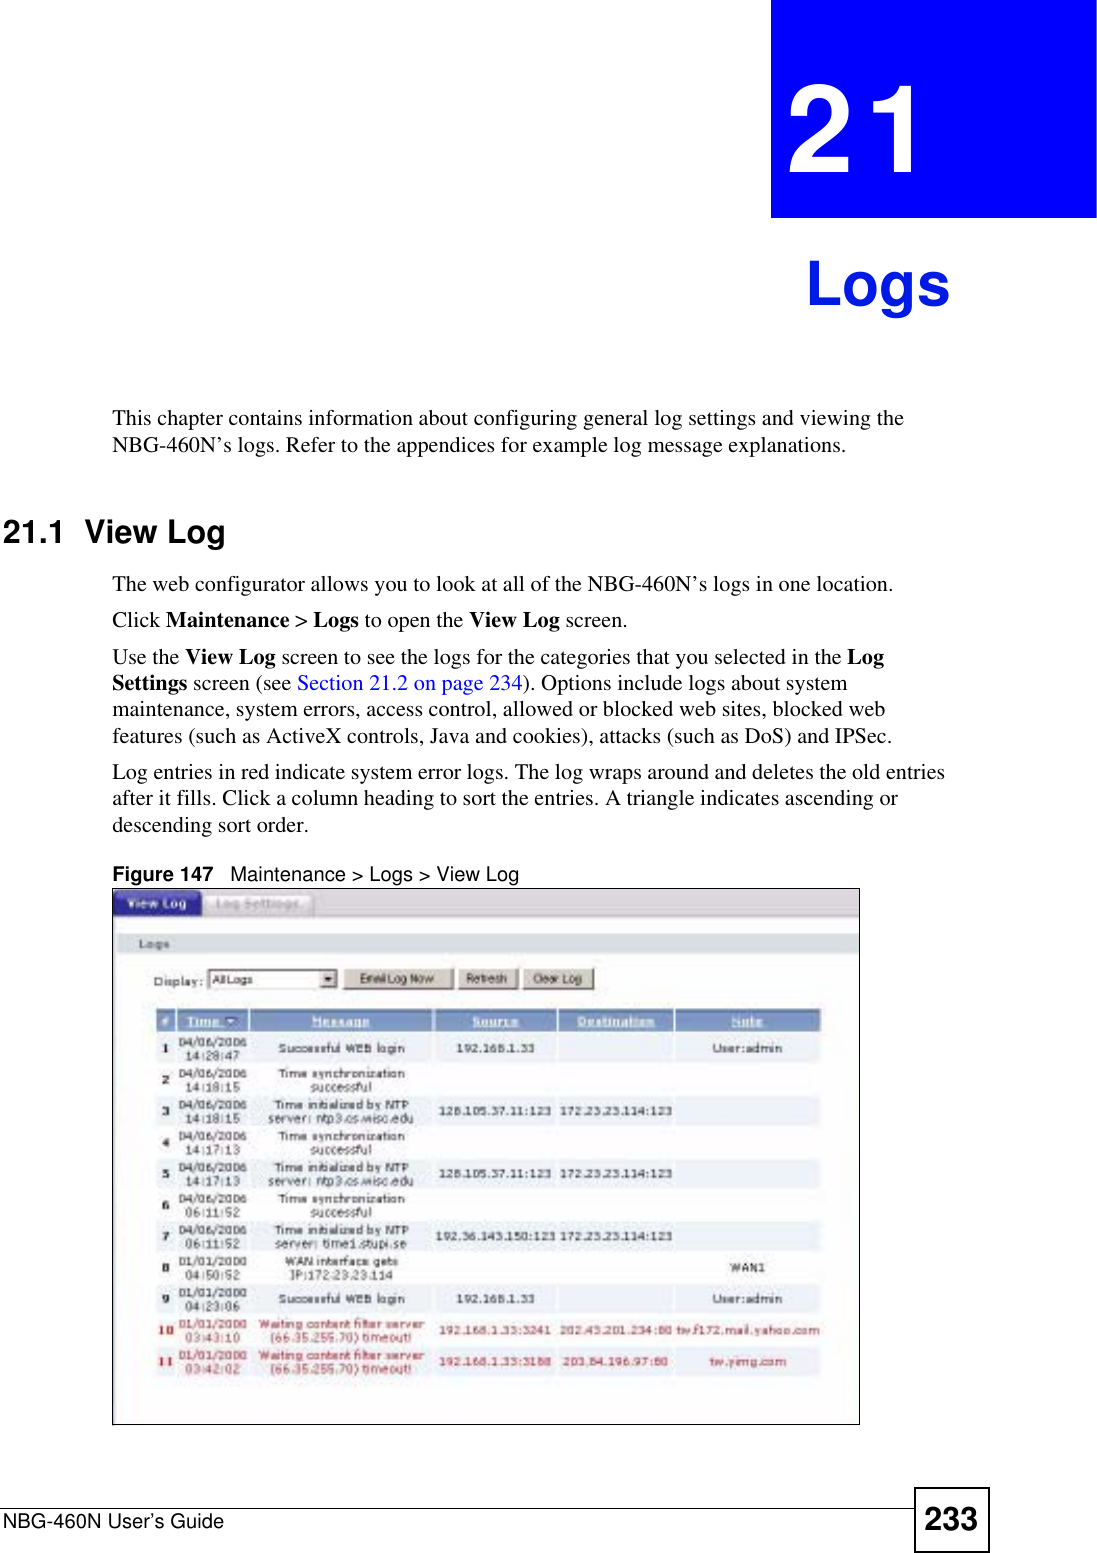 NBG-460N User’s Guide 233CHAPTER 21LogsThis chapter contains information about configuring general log settings and viewing the NBG-460N’s logs. Refer to the appendices for example log message explanations.21.1  View Log The web configurator allows you to look at all of the NBG-460N’s logs in one location. Click Maintenance &gt; Logs to open the View Log screen. Use the View Log screen to see the logs for the categories that you selected in the Log Settings screen (see Section 21.2 on page 234). Options include logs about system maintenance, system errors, access control, allowed or blocked web sites, blocked web features (such as ActiveX controls, Java and cookies), attacks (such as DoS) and IPSec.Log entries in red indicate system error logs. The log wraps around and deletes the old entries after it fills. Click a column heading to sort the entries. A triangle indicates ascending or descending sort order. Figure 147   Maintenance &gt; Logs &gt; View Log 